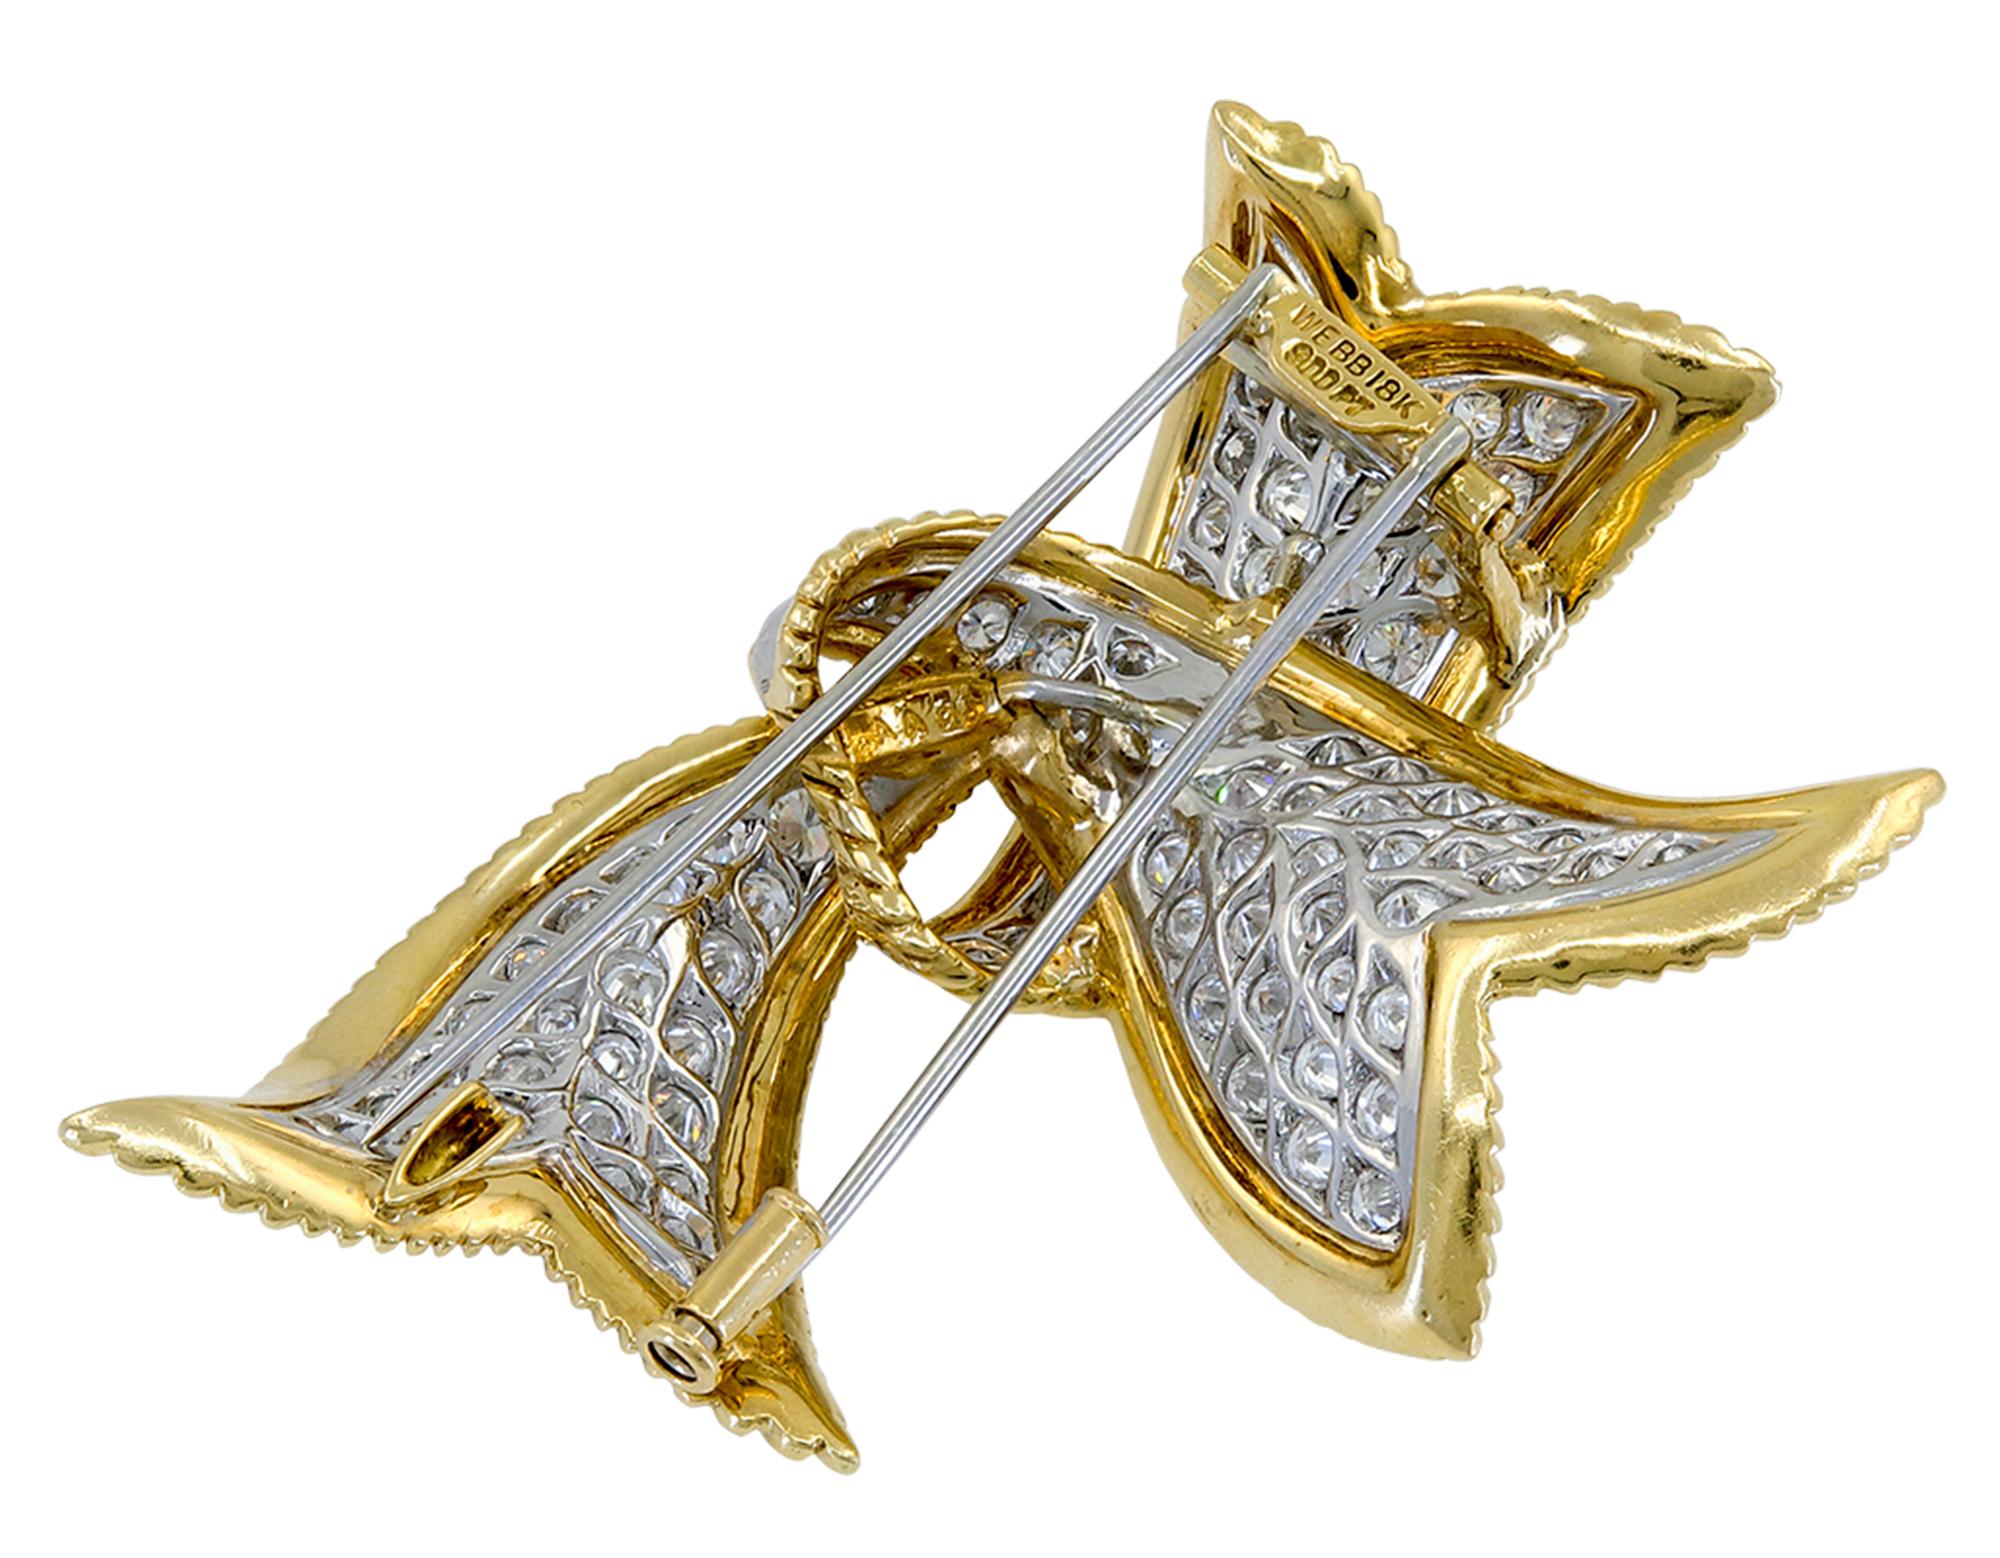 Elegant ribbon brooch, created by David Webb, featuring approximately 10.67 carats of brilliant-cut diamonds, textured 18K yellow gold, and platinum.
Signed David Webb.
Certificate of Authenticity is provided.